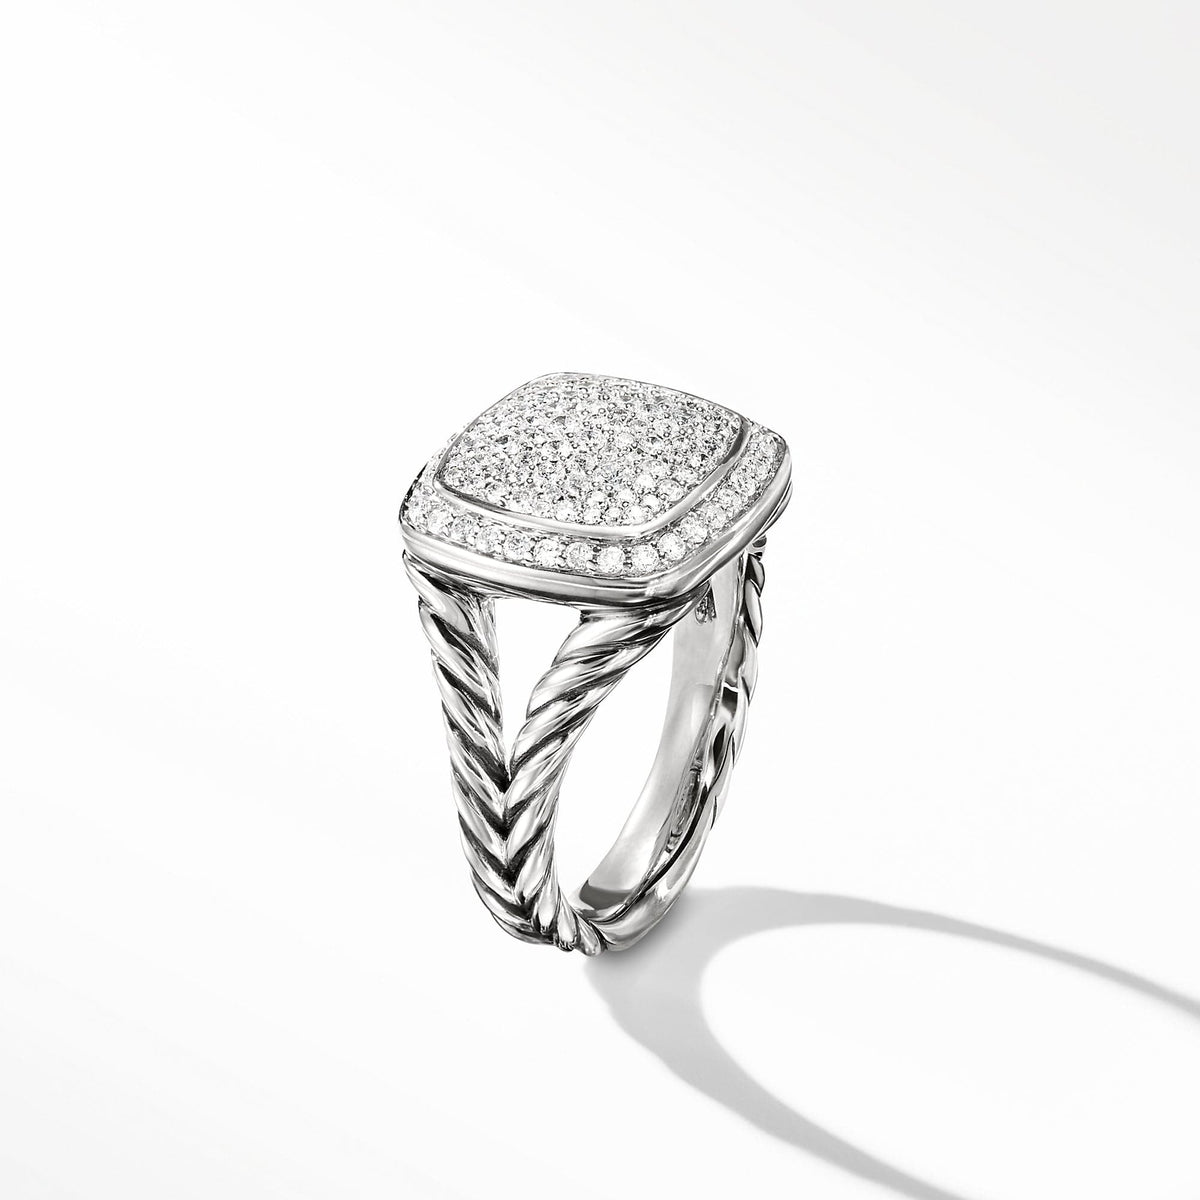 Ring with Diamonds